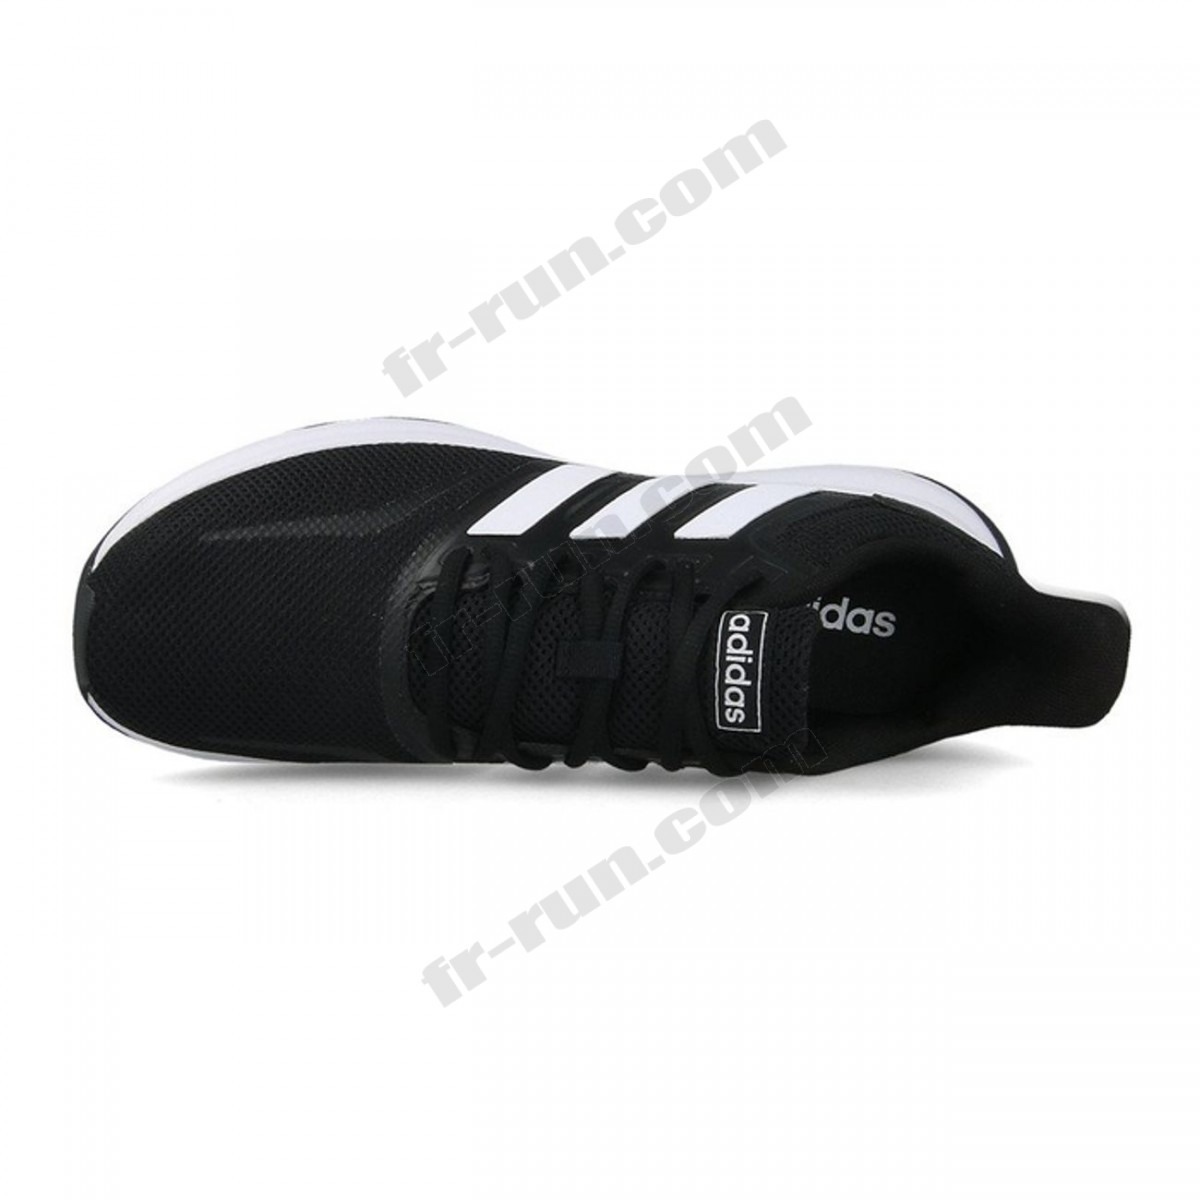 Adidas/CHAUSSURES BASSES running homme ADIDAS RUNFALCON, NOIR √ Nouveau style √ Soldes - -1